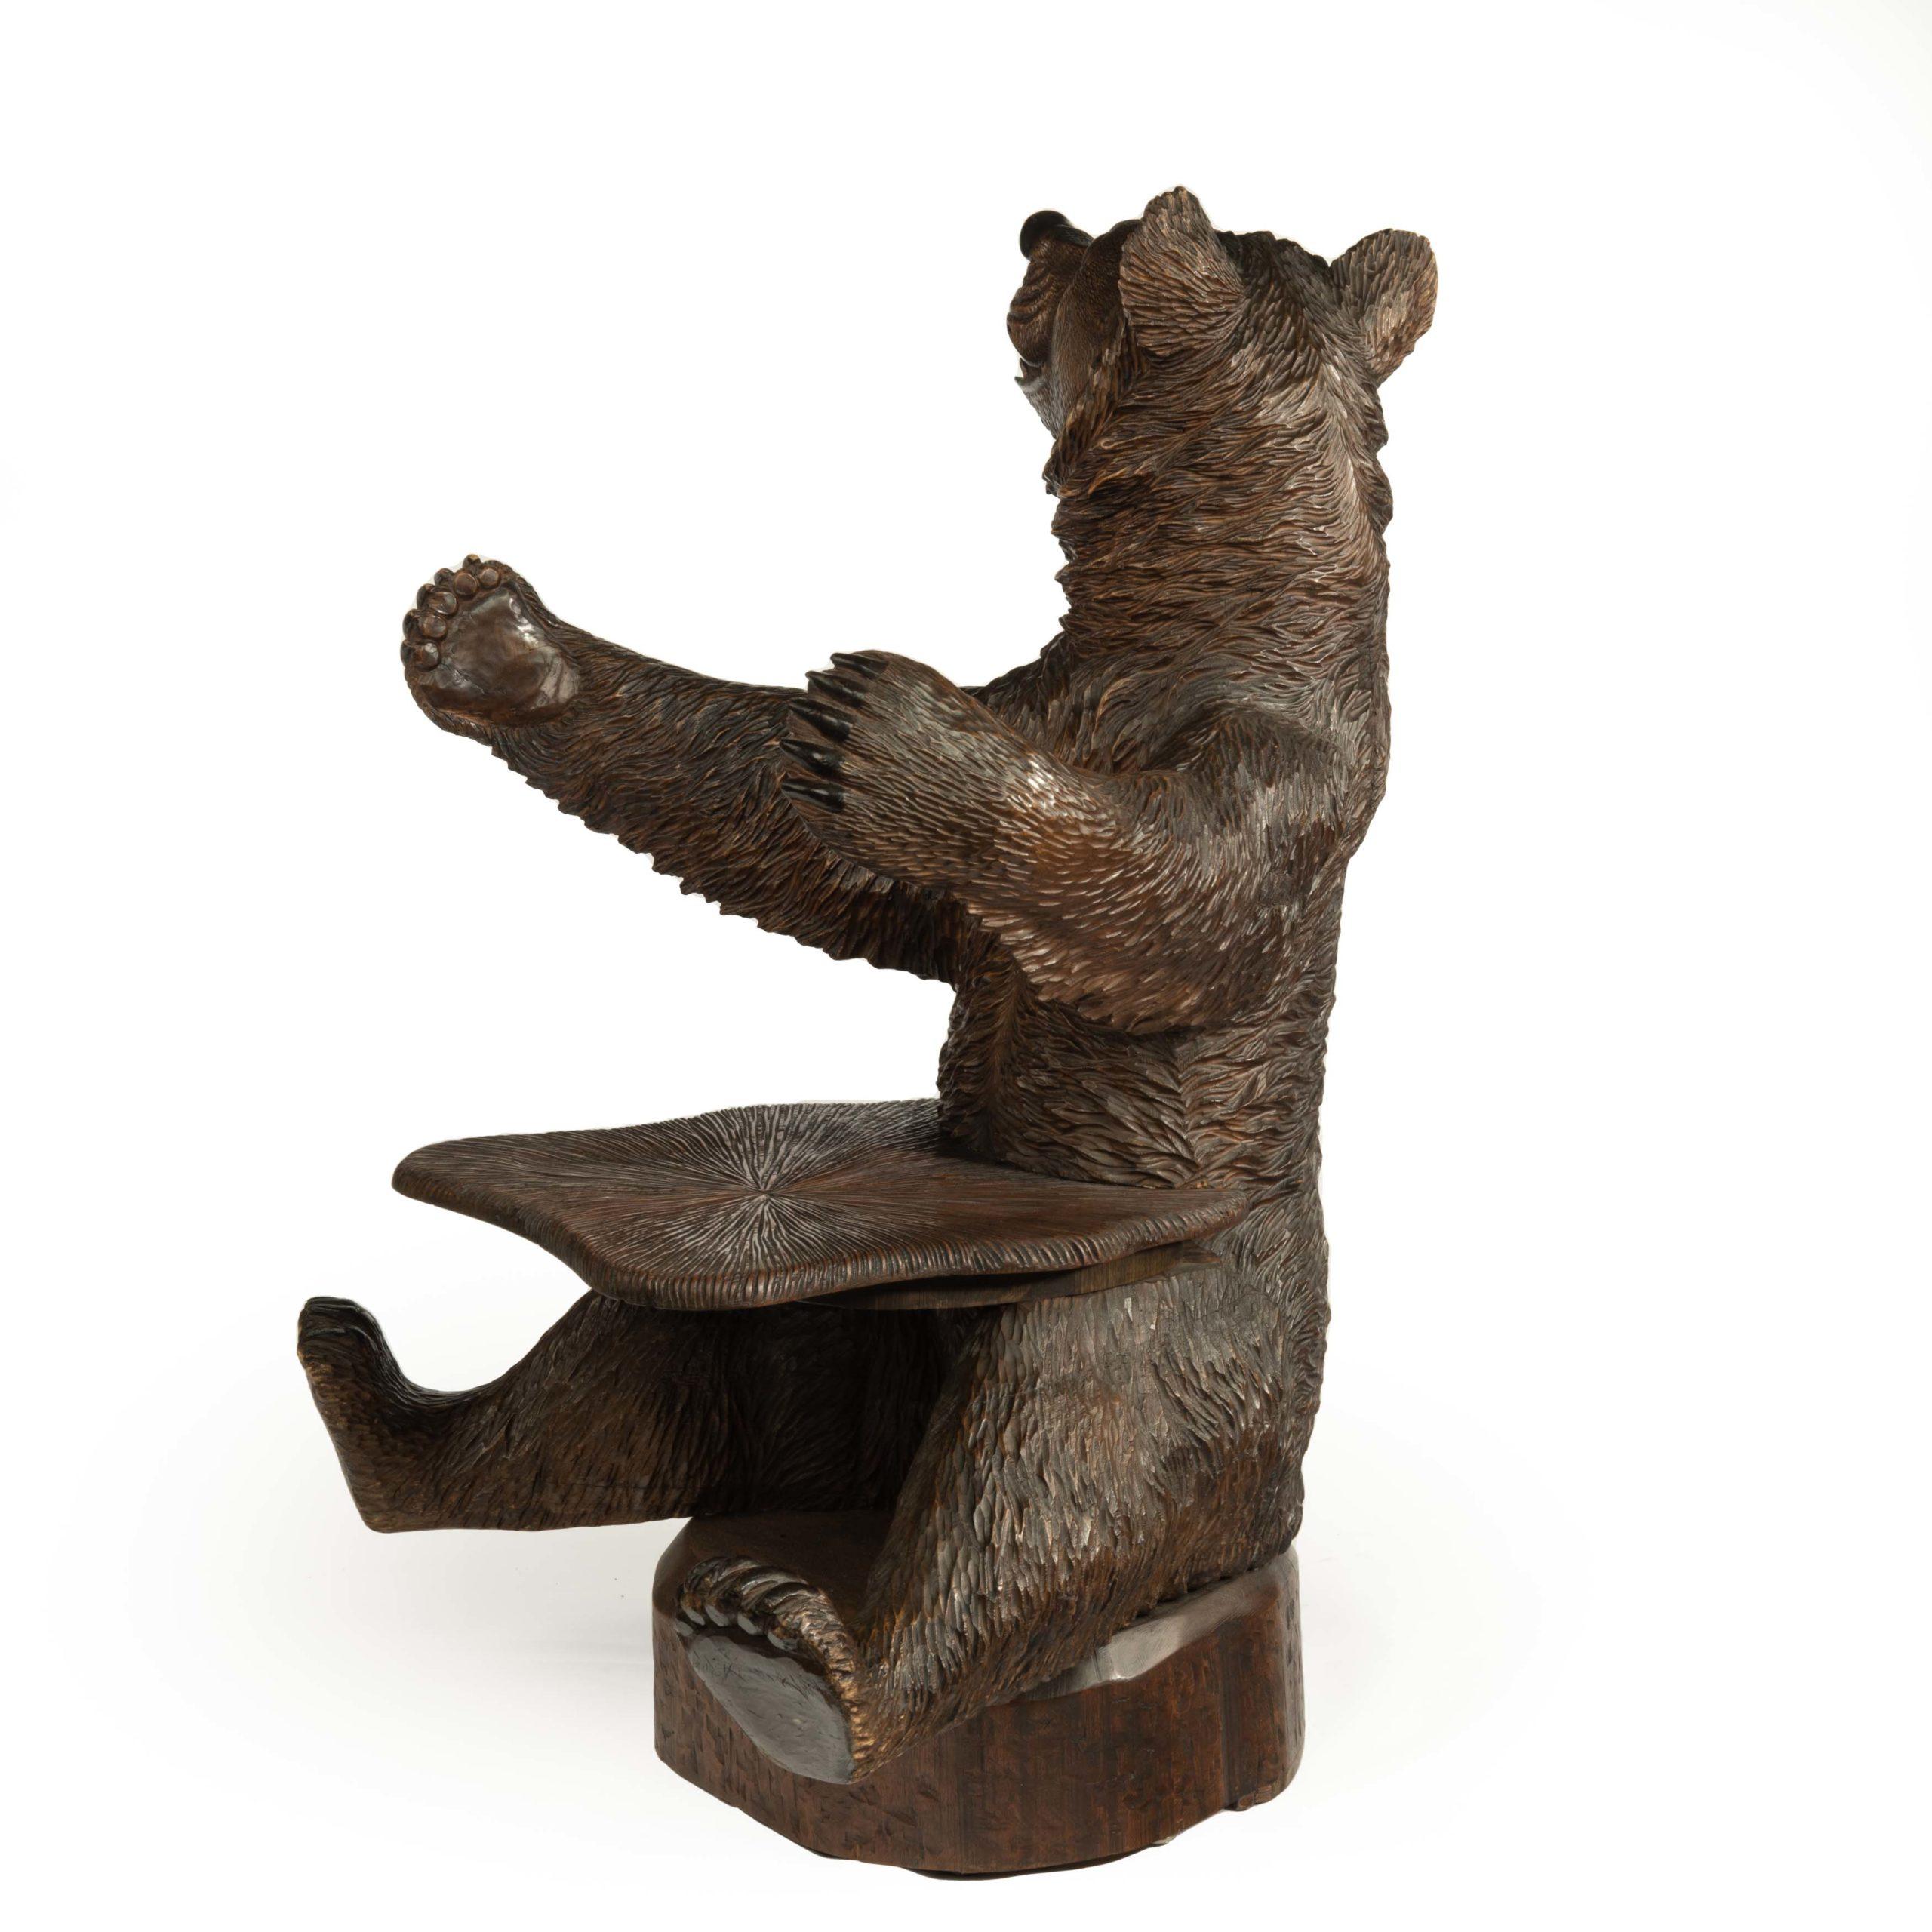 A linden wood ’Black Forest’ Bear armchair from Peter Trauffer, modelled as a seated bear with a radiating grooved seat in his lap, his paws outstretched in an embrace and his head turned to the right, the fur and sharp teeth realistically carved